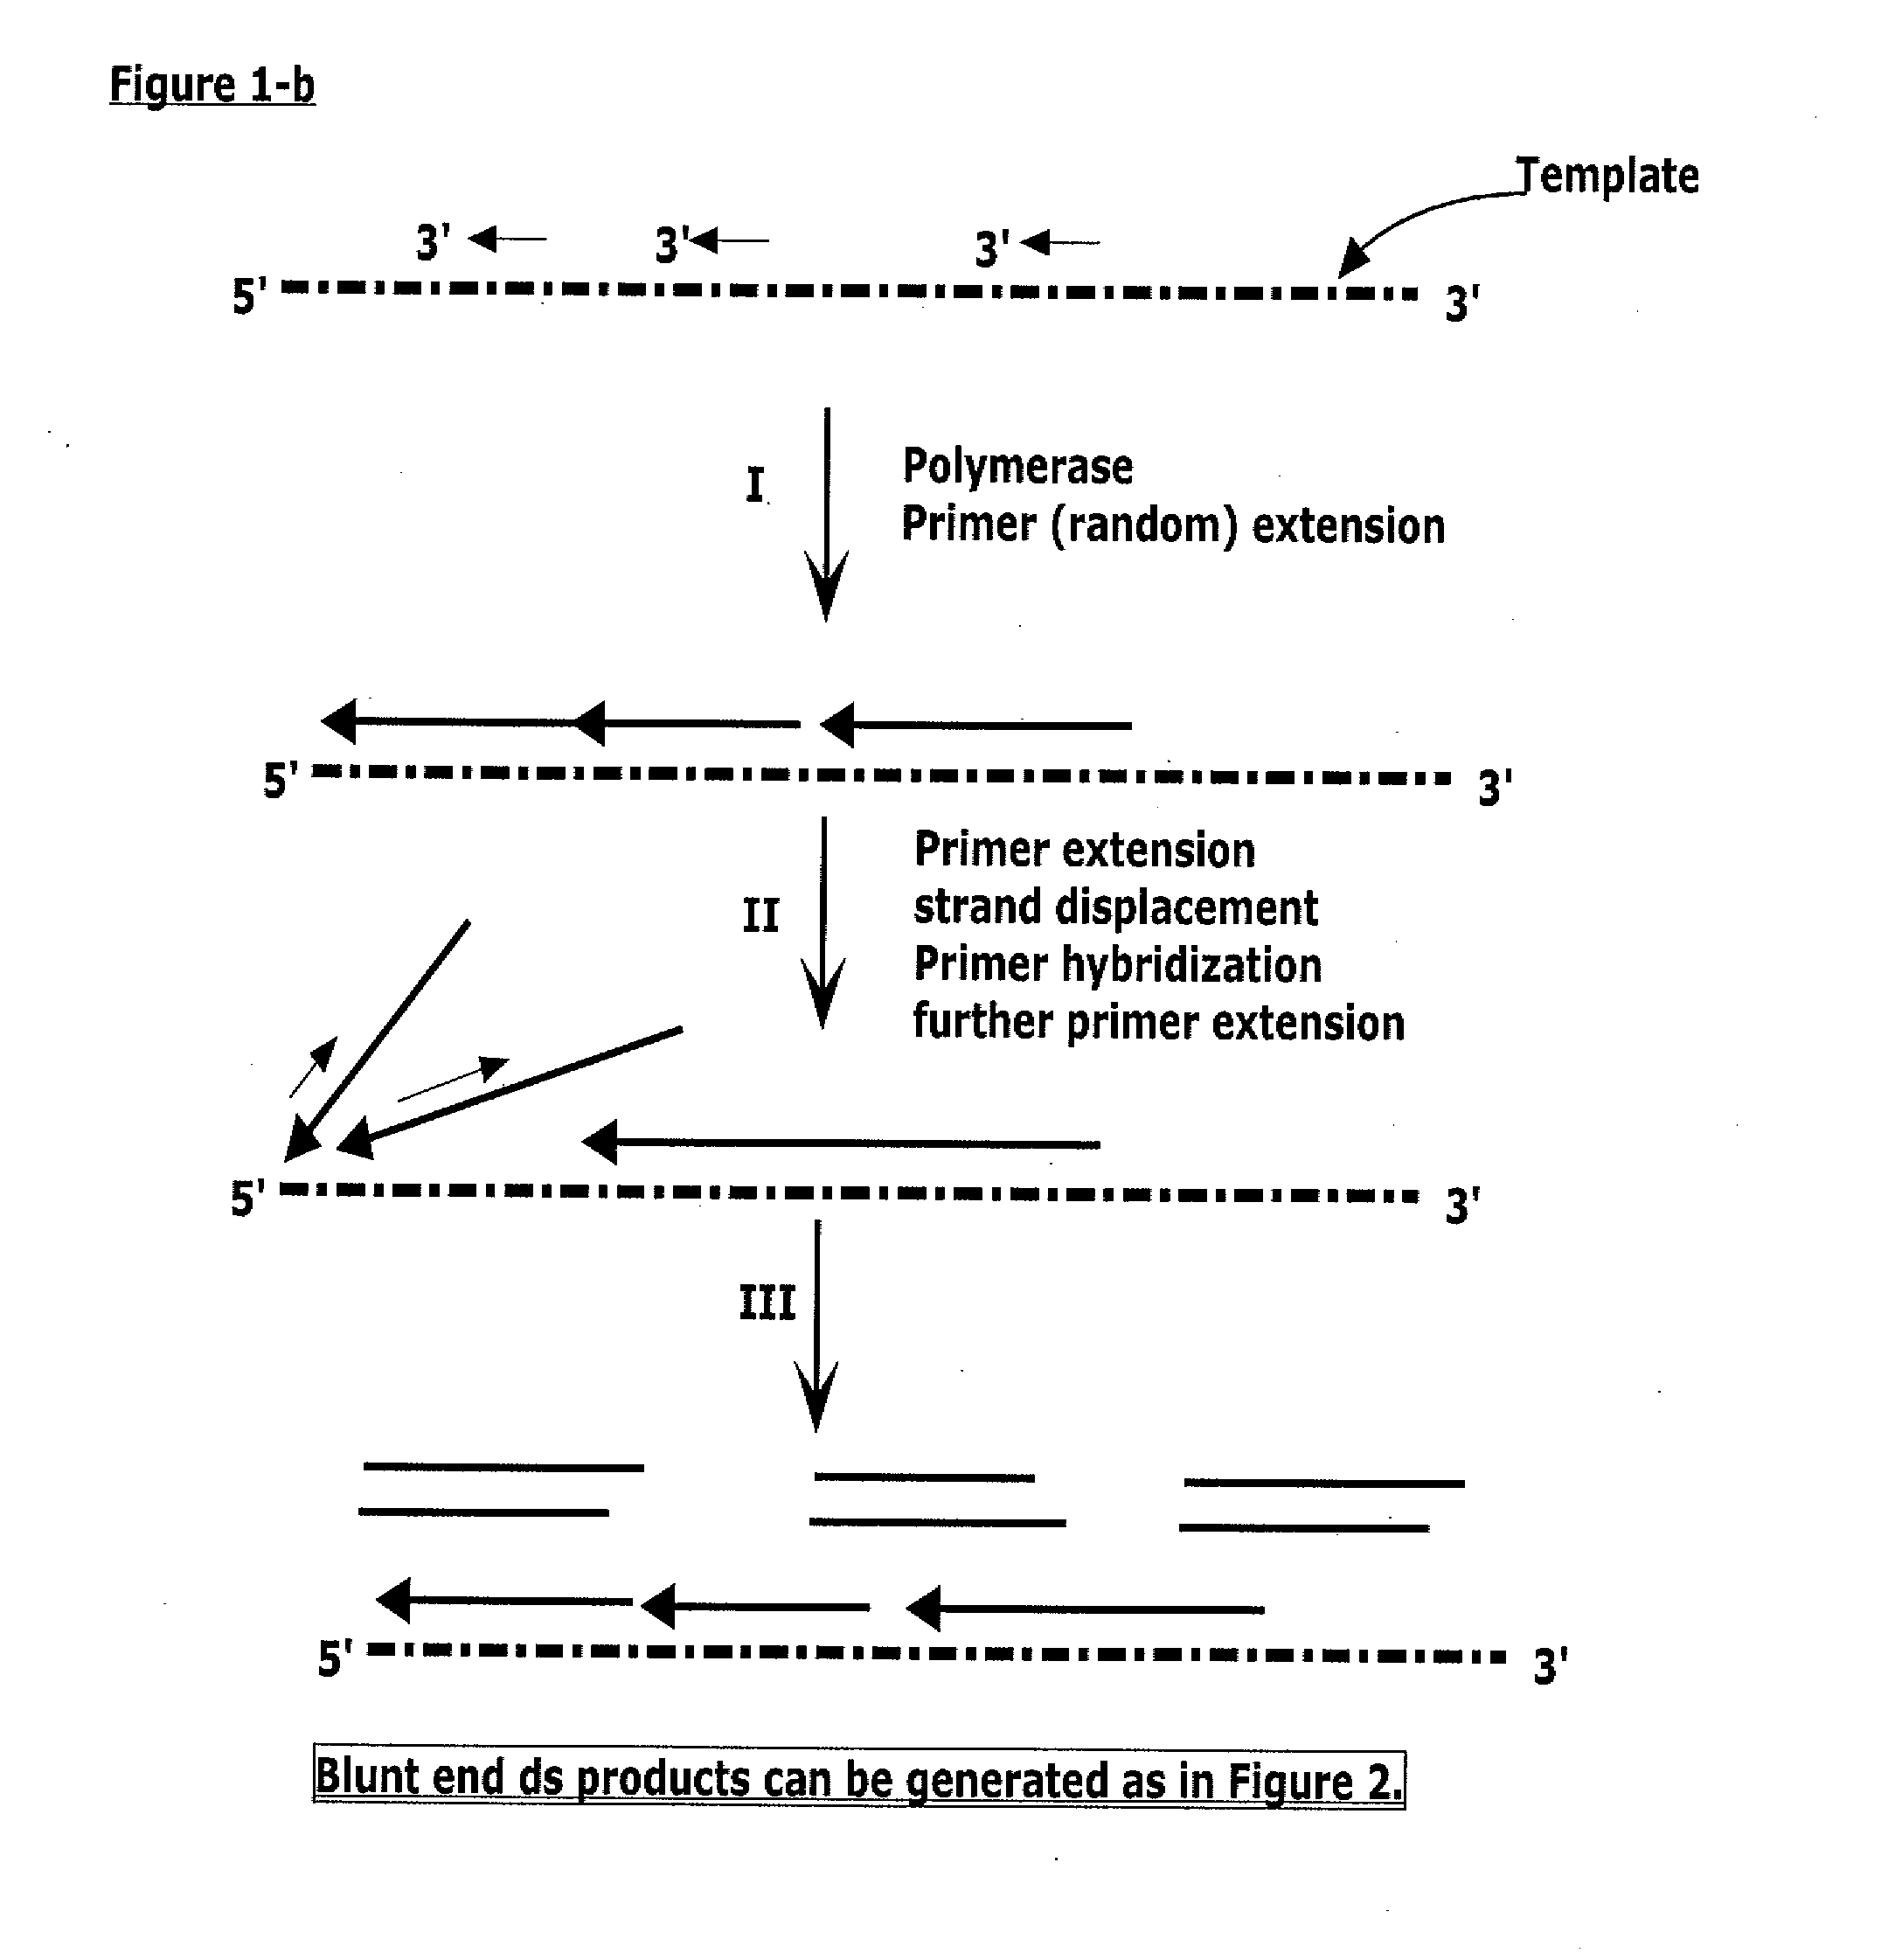 Methods, compositions, and kits for generating nucleic acid products substantially free of template nucleic acid